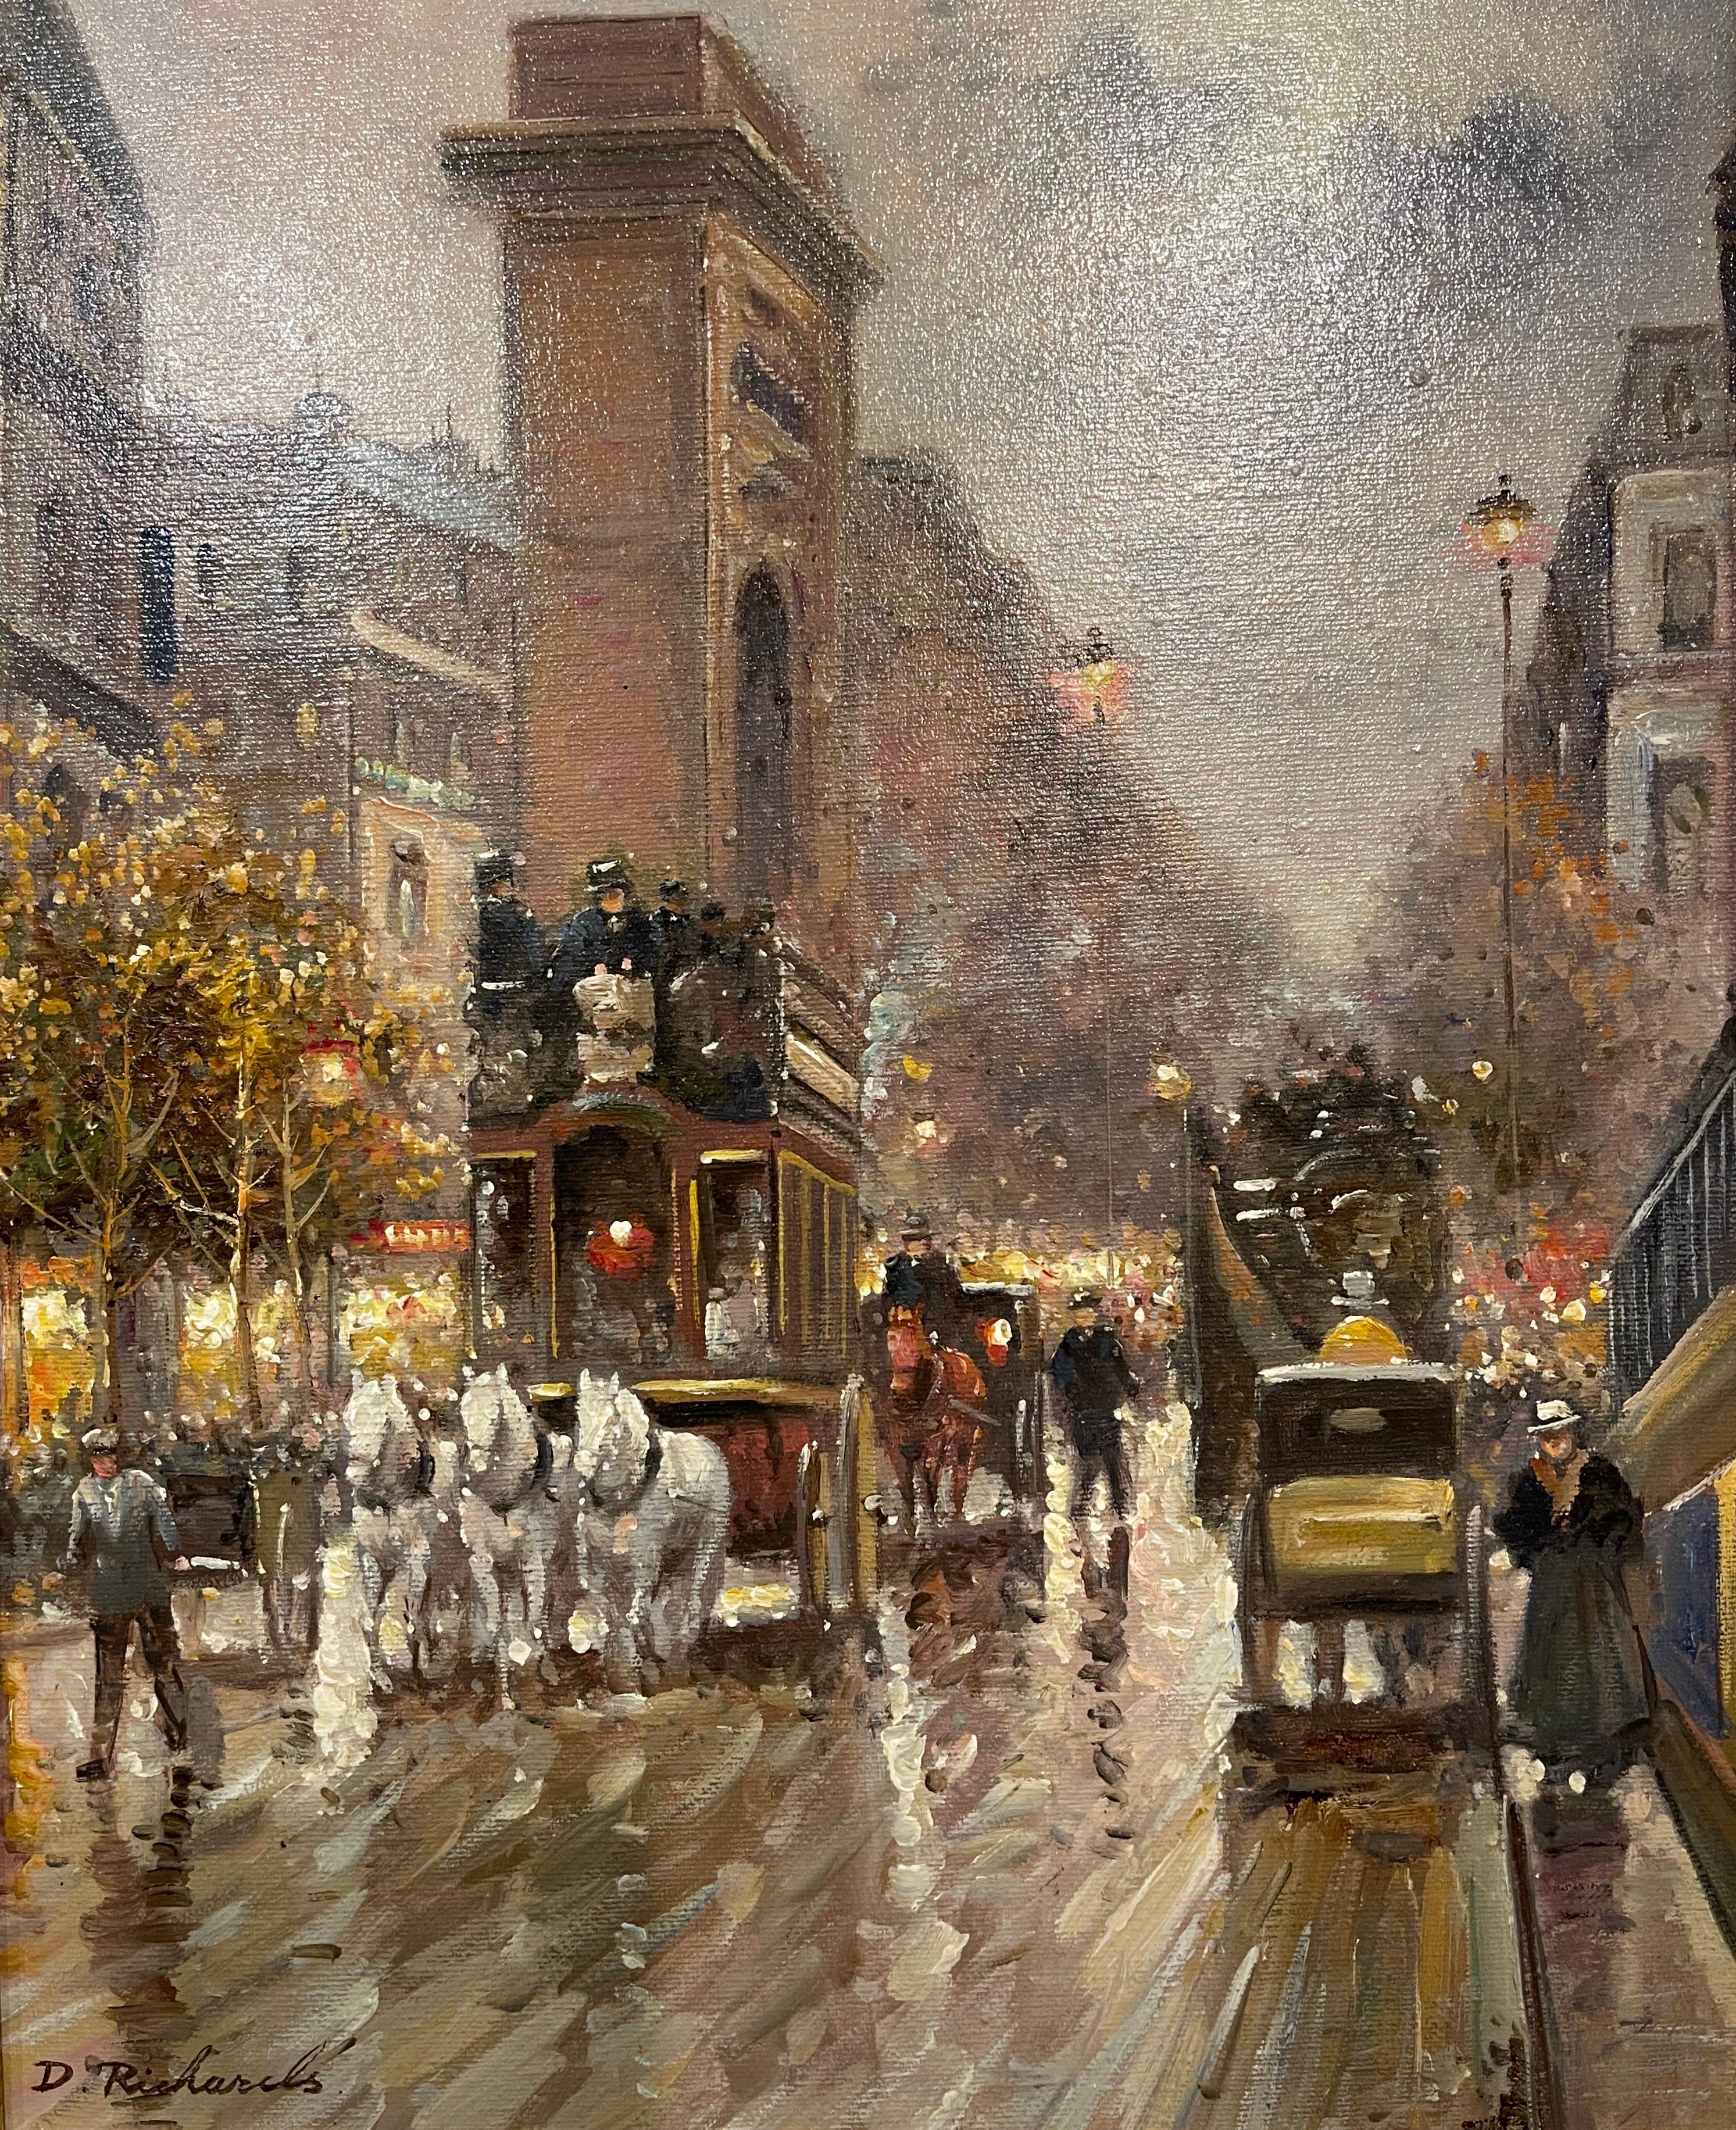 Decorate a study or living space with this beautiful oil on canvas painting. Set in the original carved gilt frame and created circa 1960, this artwork depicts a typical Paris scene in the late 19th century, with horse-drawn carriages transporting